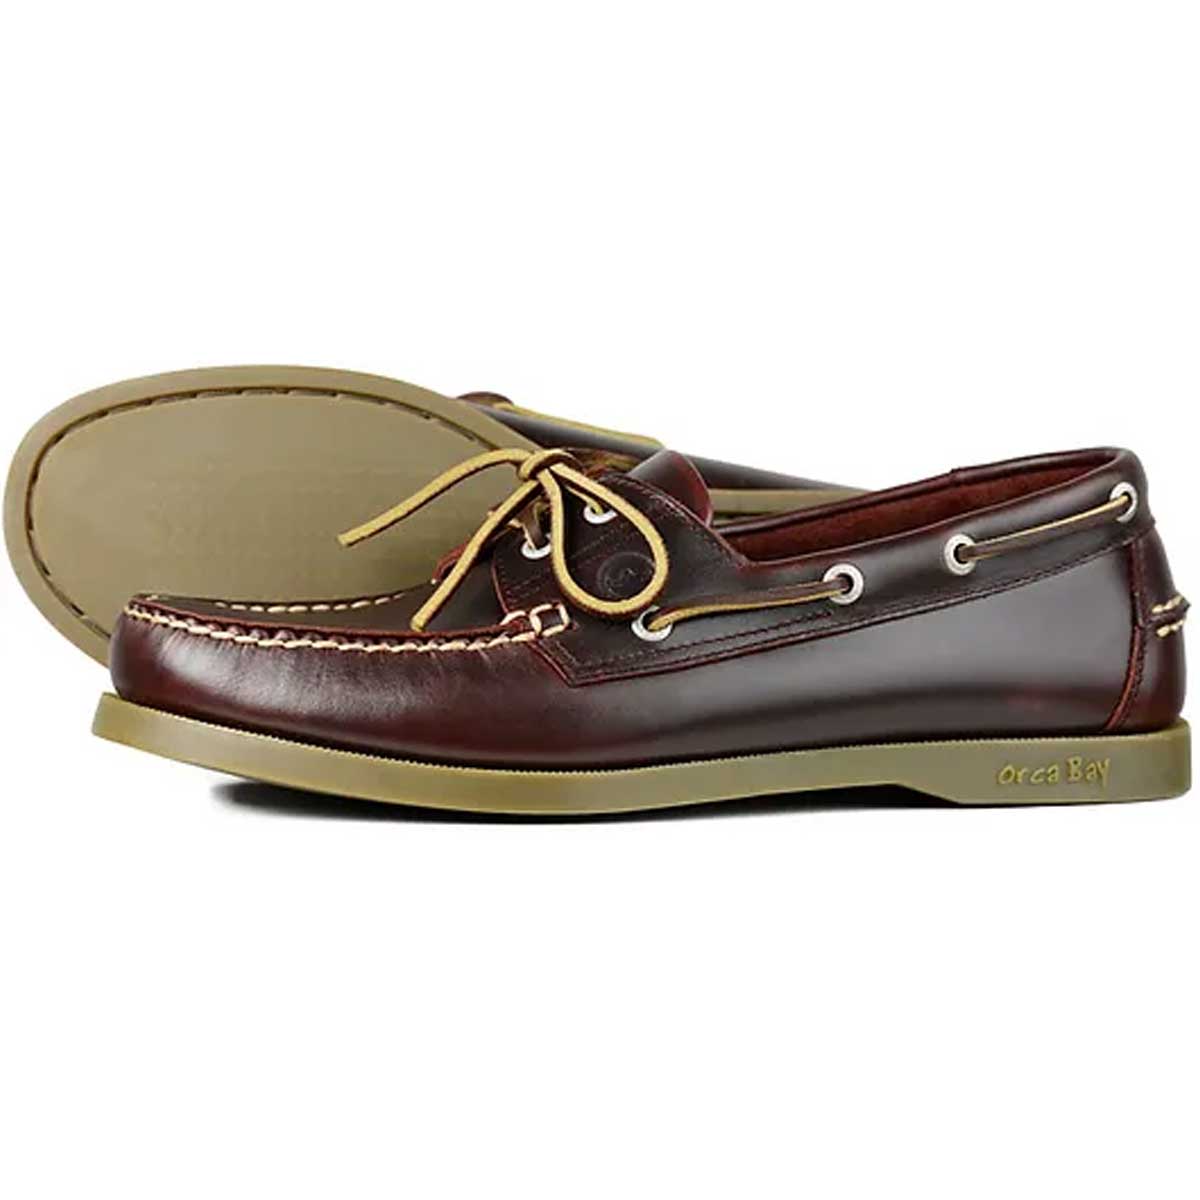 ORCA BAY Mens Creek Leather Deck Shoes - Burgundy